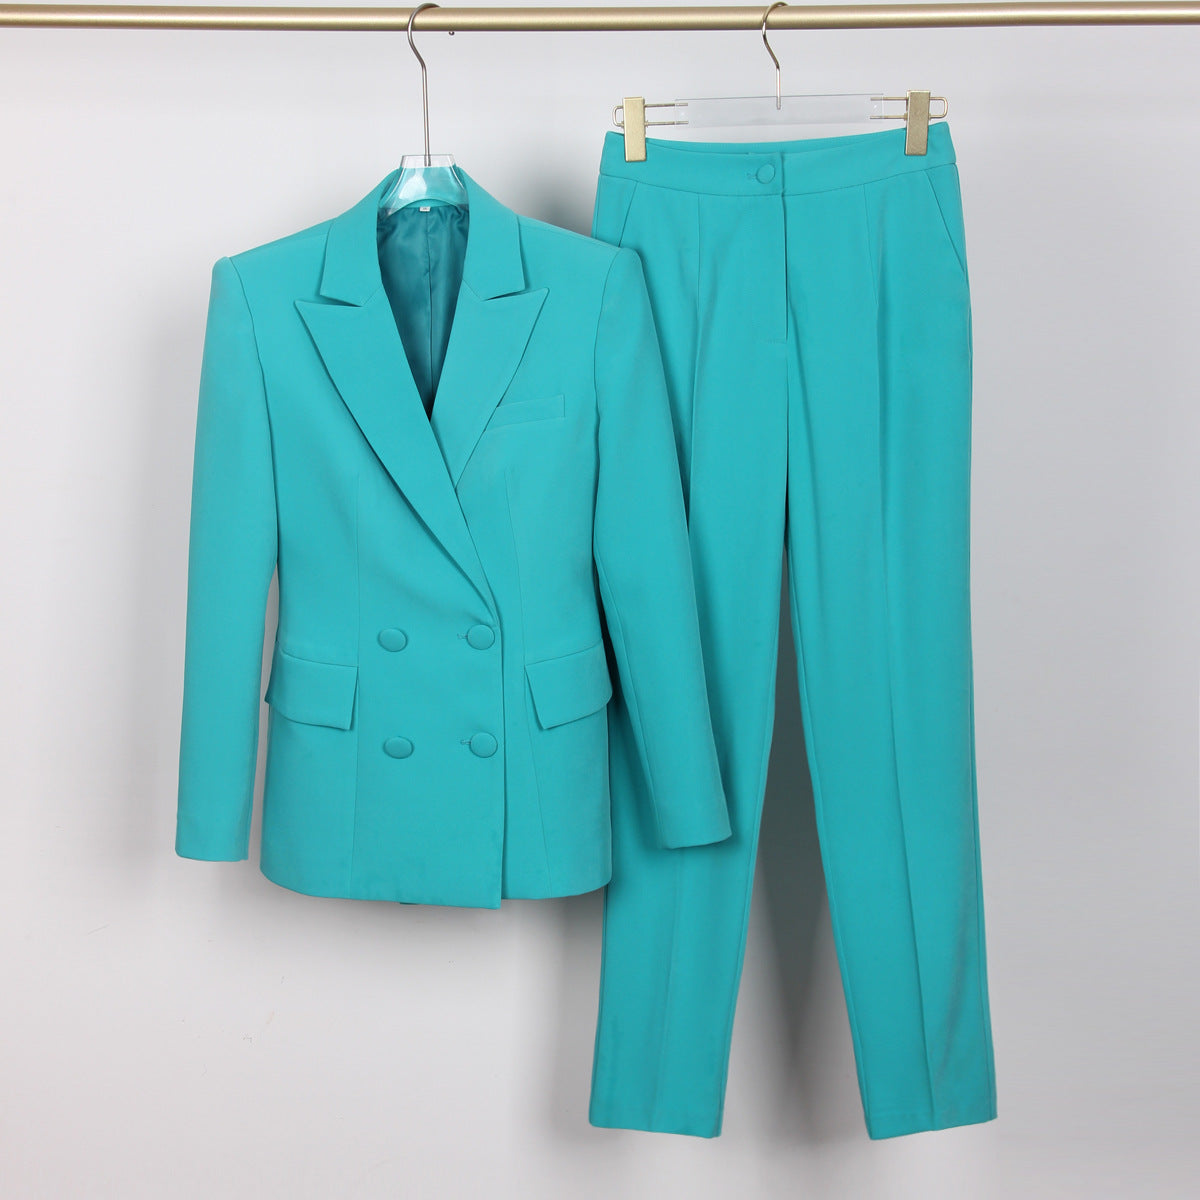 Outfit Ideas | Jade Green Aesthetic Blazer Wide Leg Pants Outfit 3-piece Set